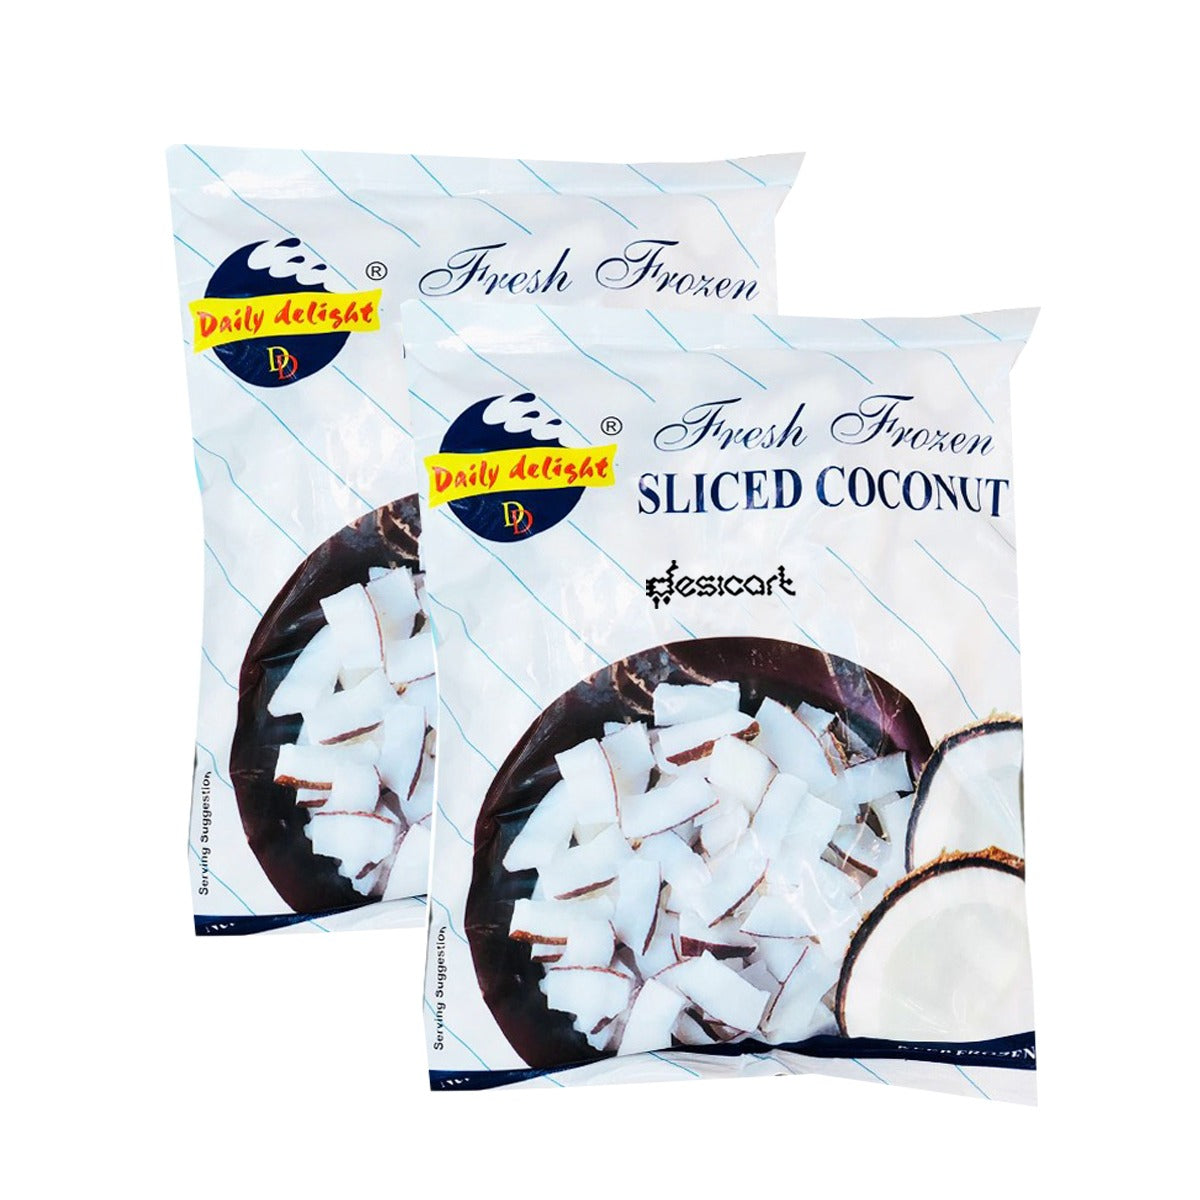 DAILY DELIGHT SLICED COCONUT 400G (PACK OF 2) 